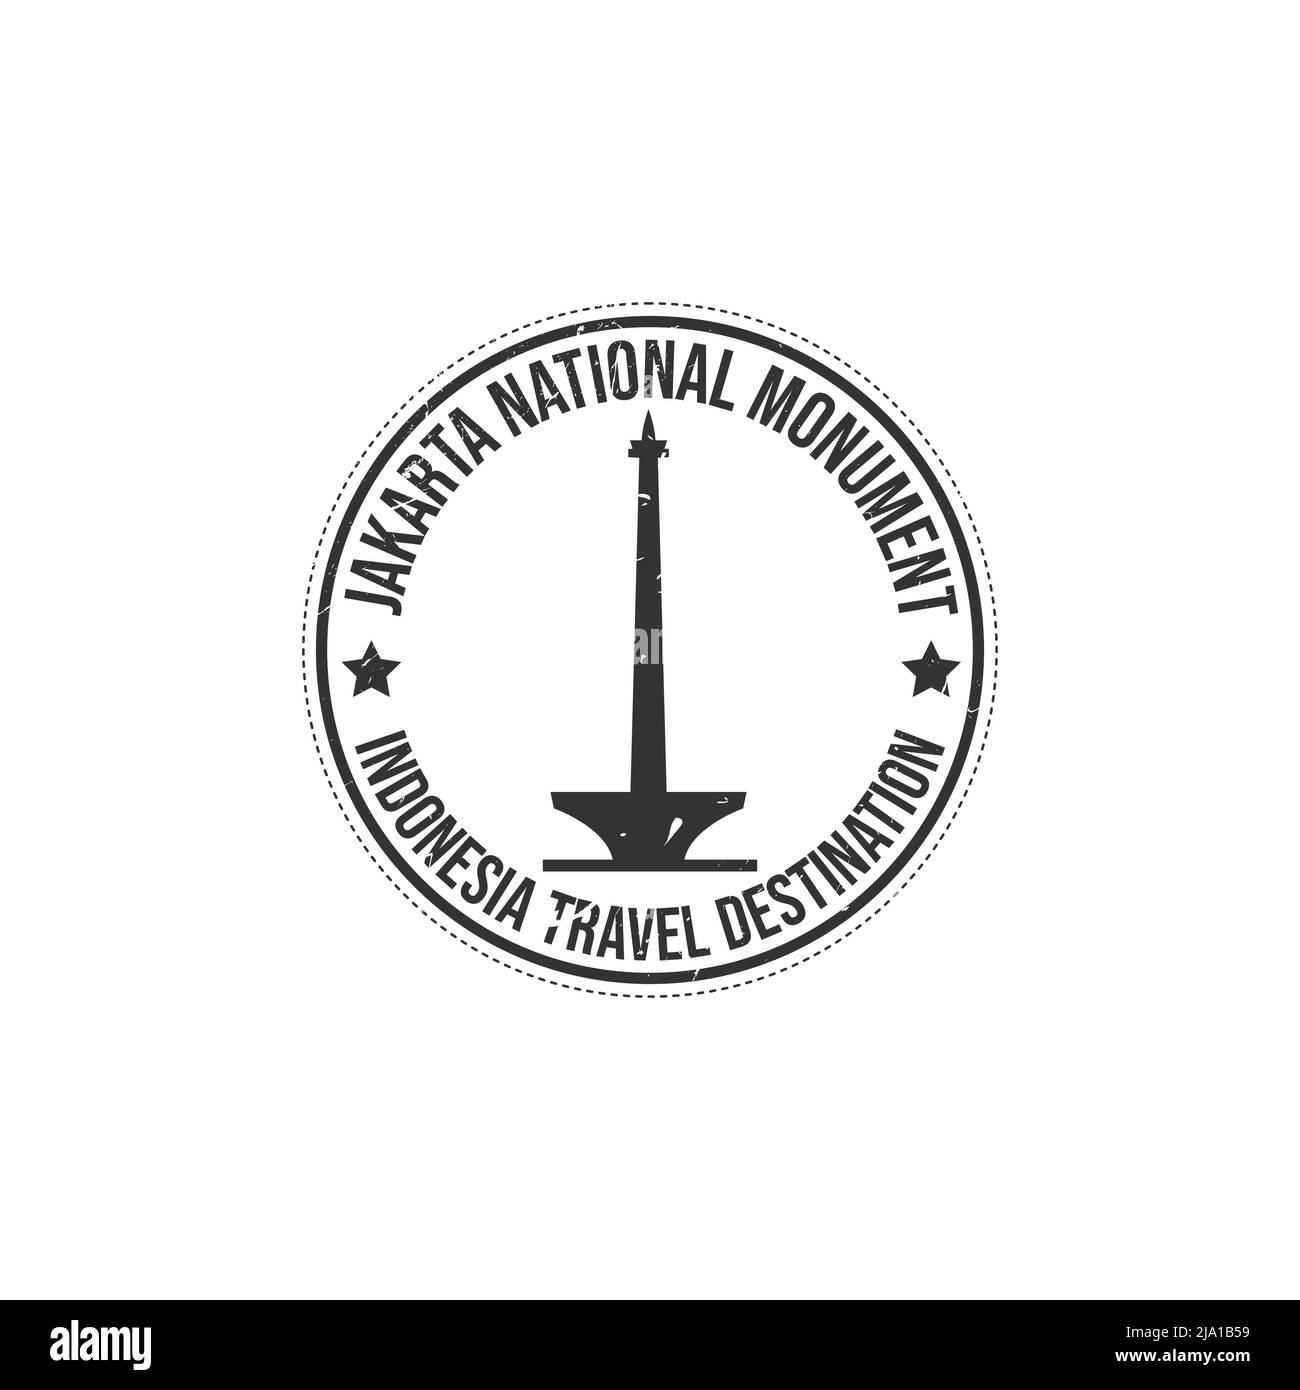 Grunge rubber stamp with the text Jakarta travel destination written inside the stamp. Time to travel. Jakarta skylines and national monument or monas Stock Vector